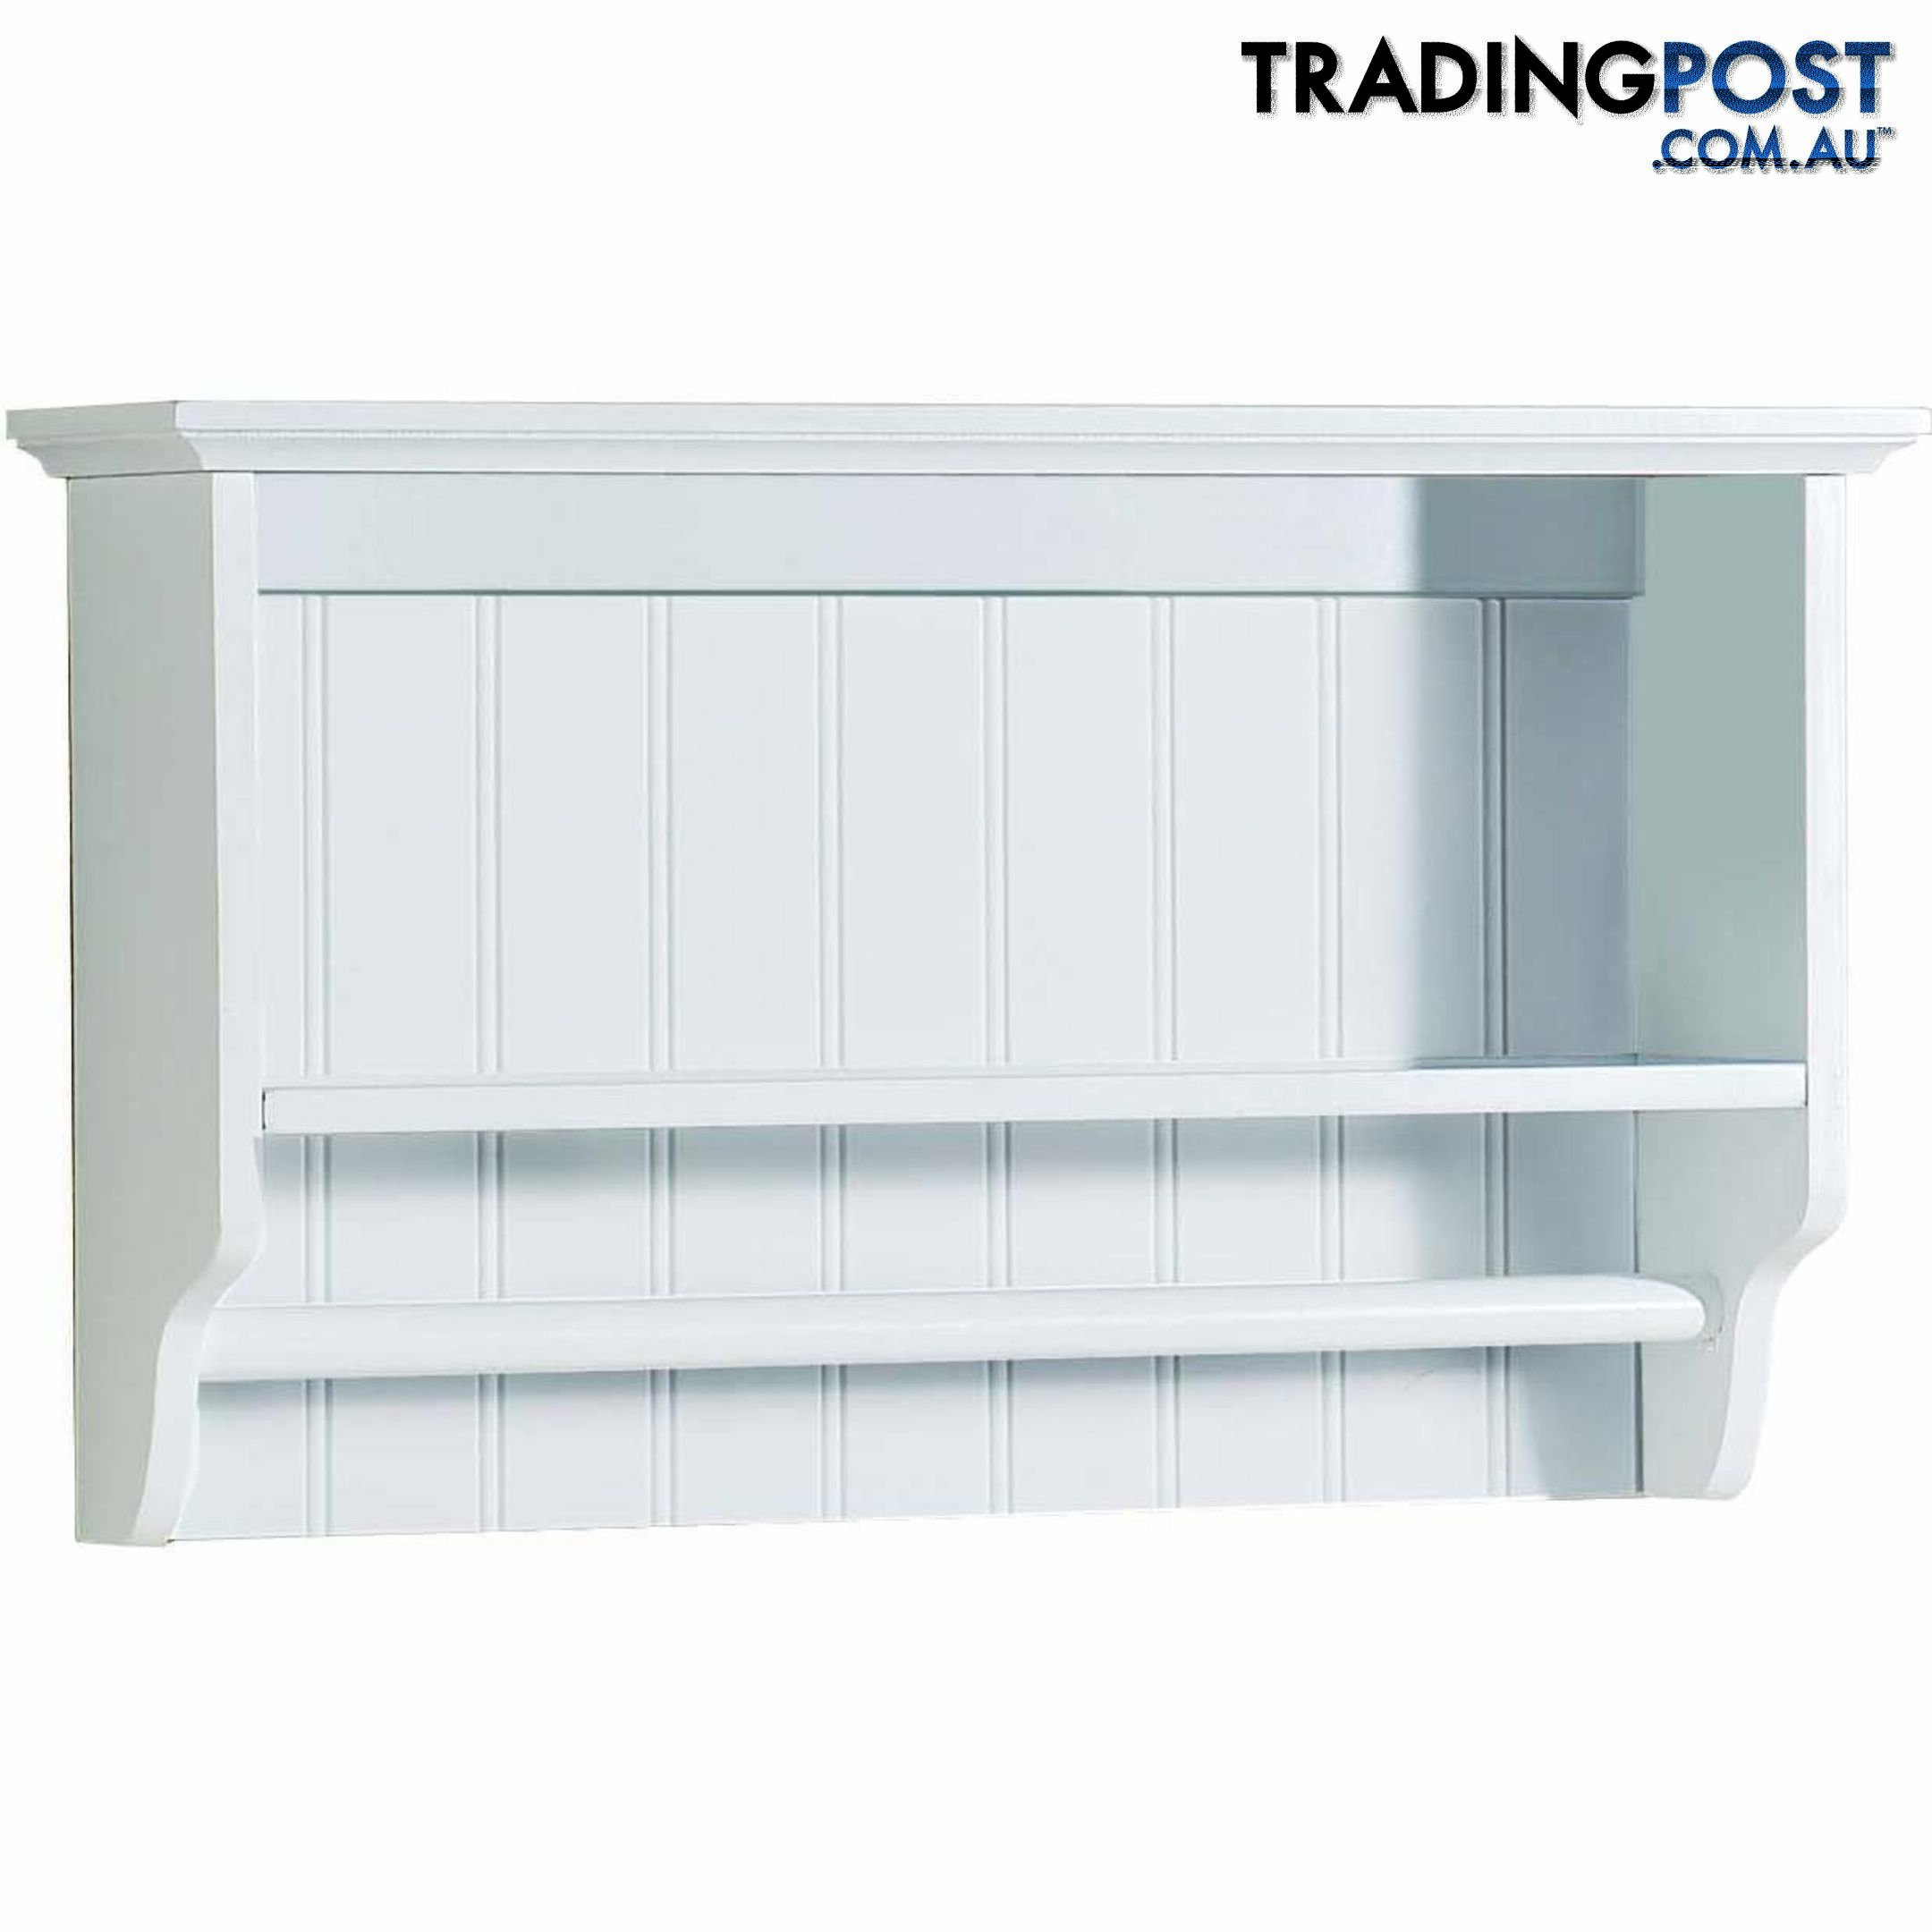 Grace Towel Rail with Shelf in WHITE